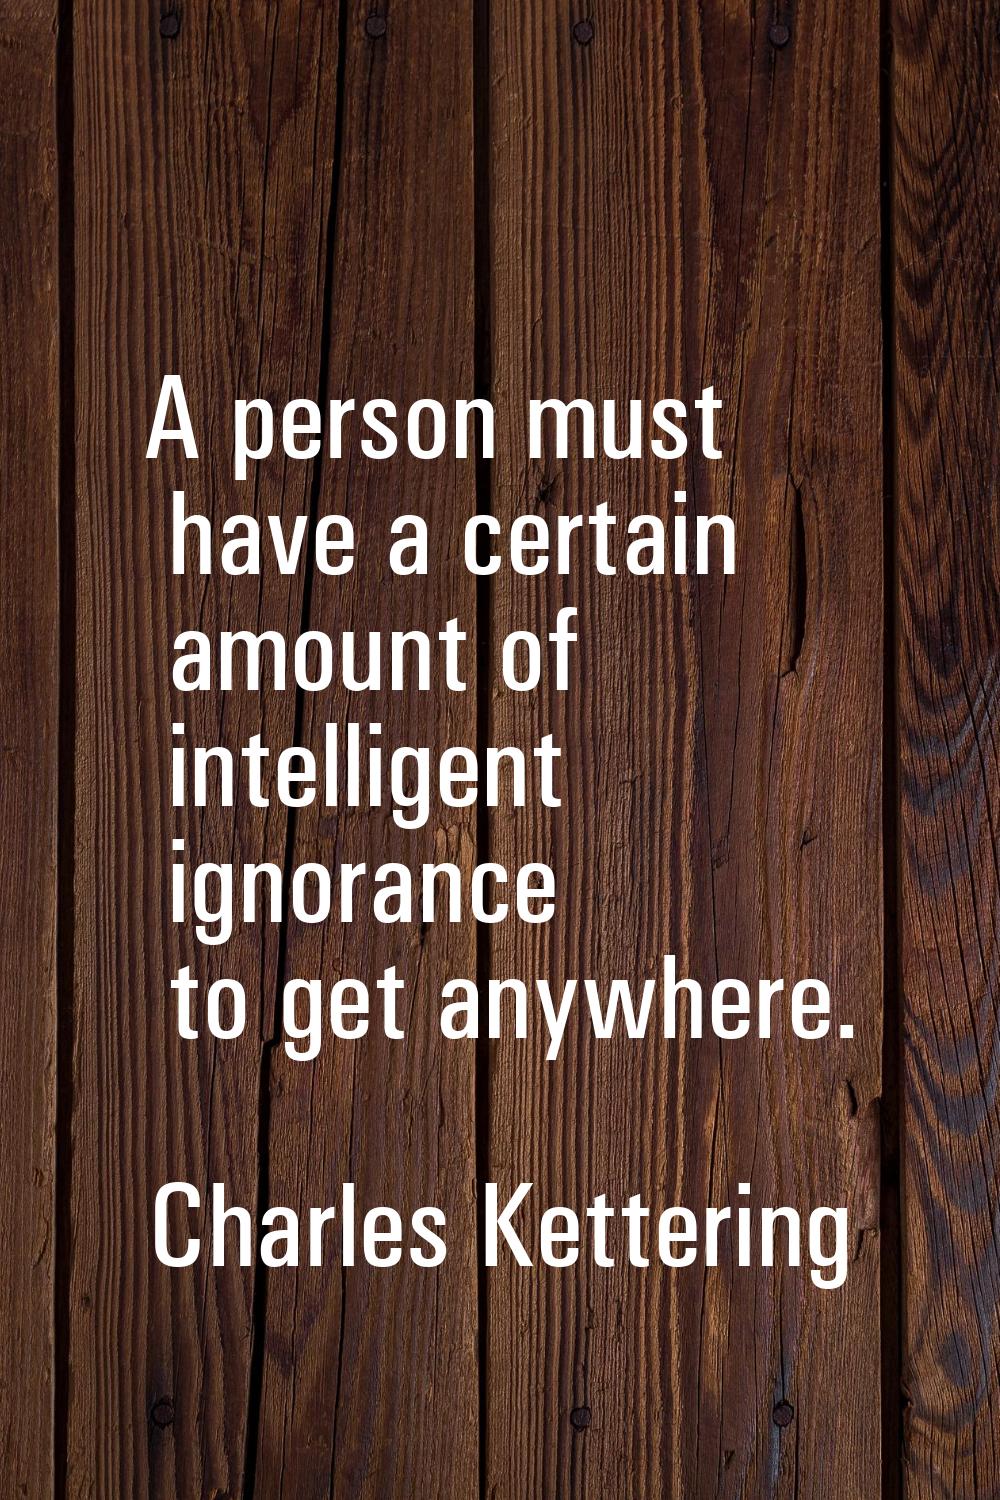 A person must have a certain amount of intelligent ignorance to get anywhere.